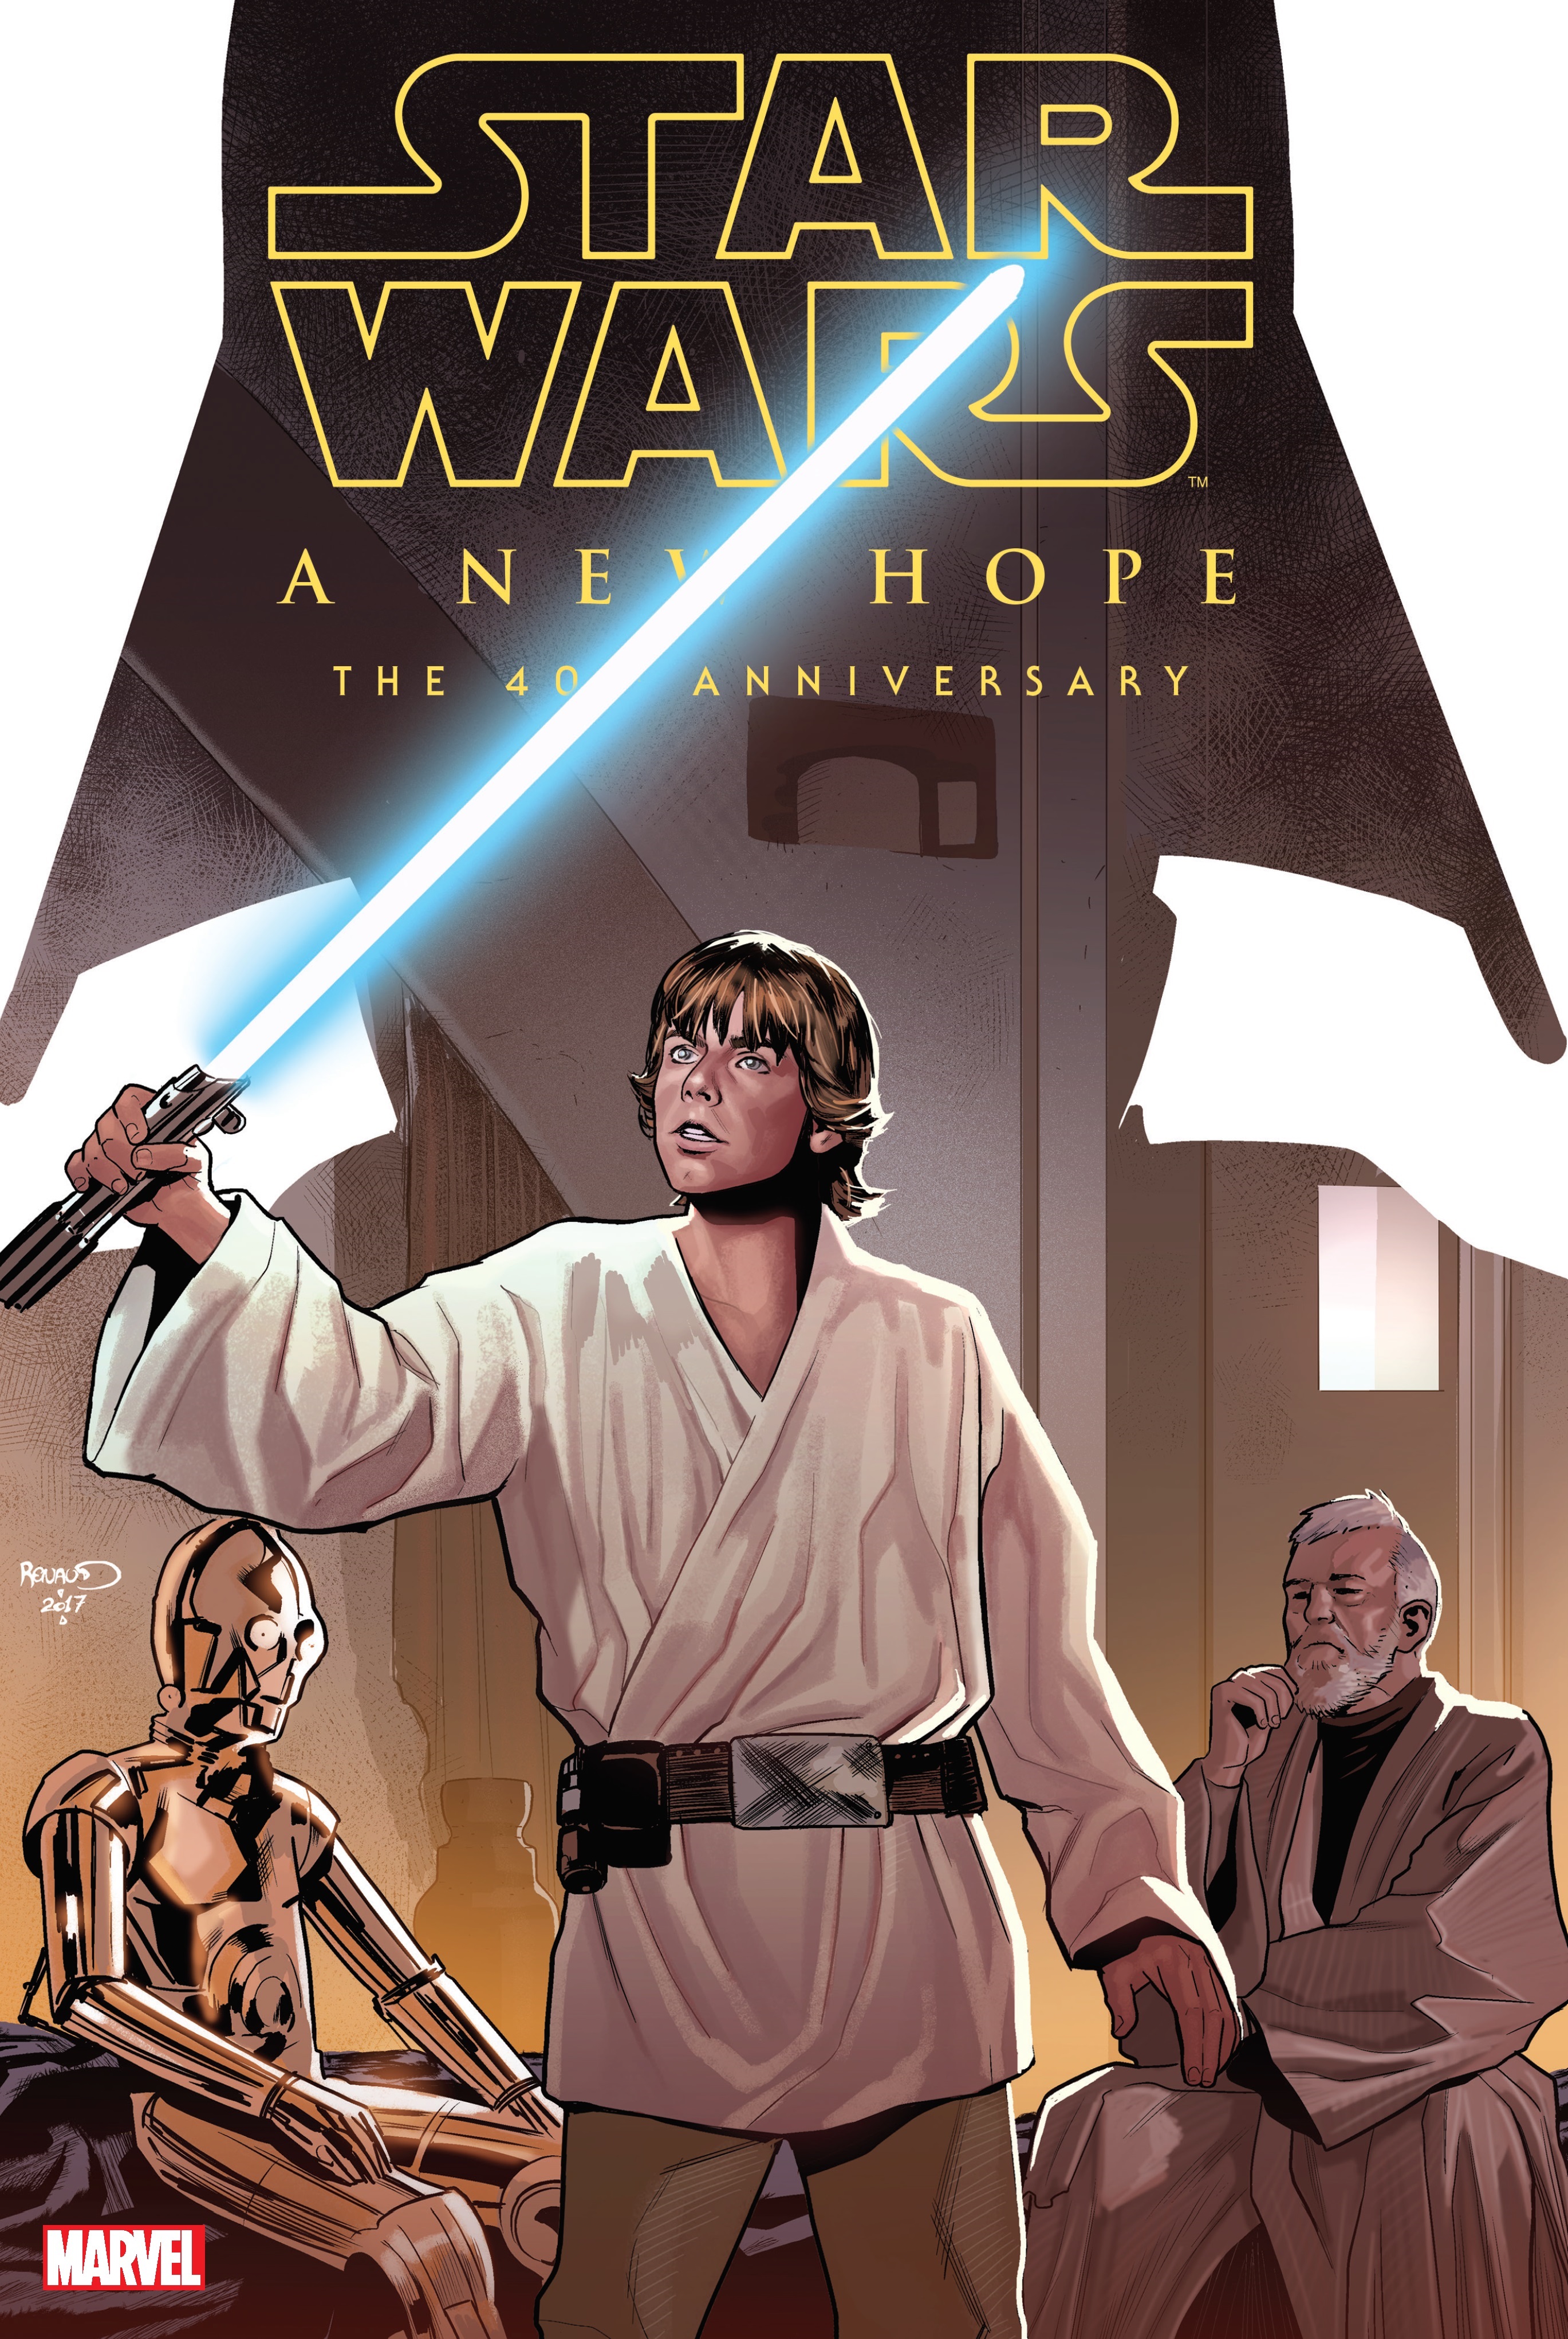 Star Wars: A New Hope - The 40th Anniversary (Hardcover)